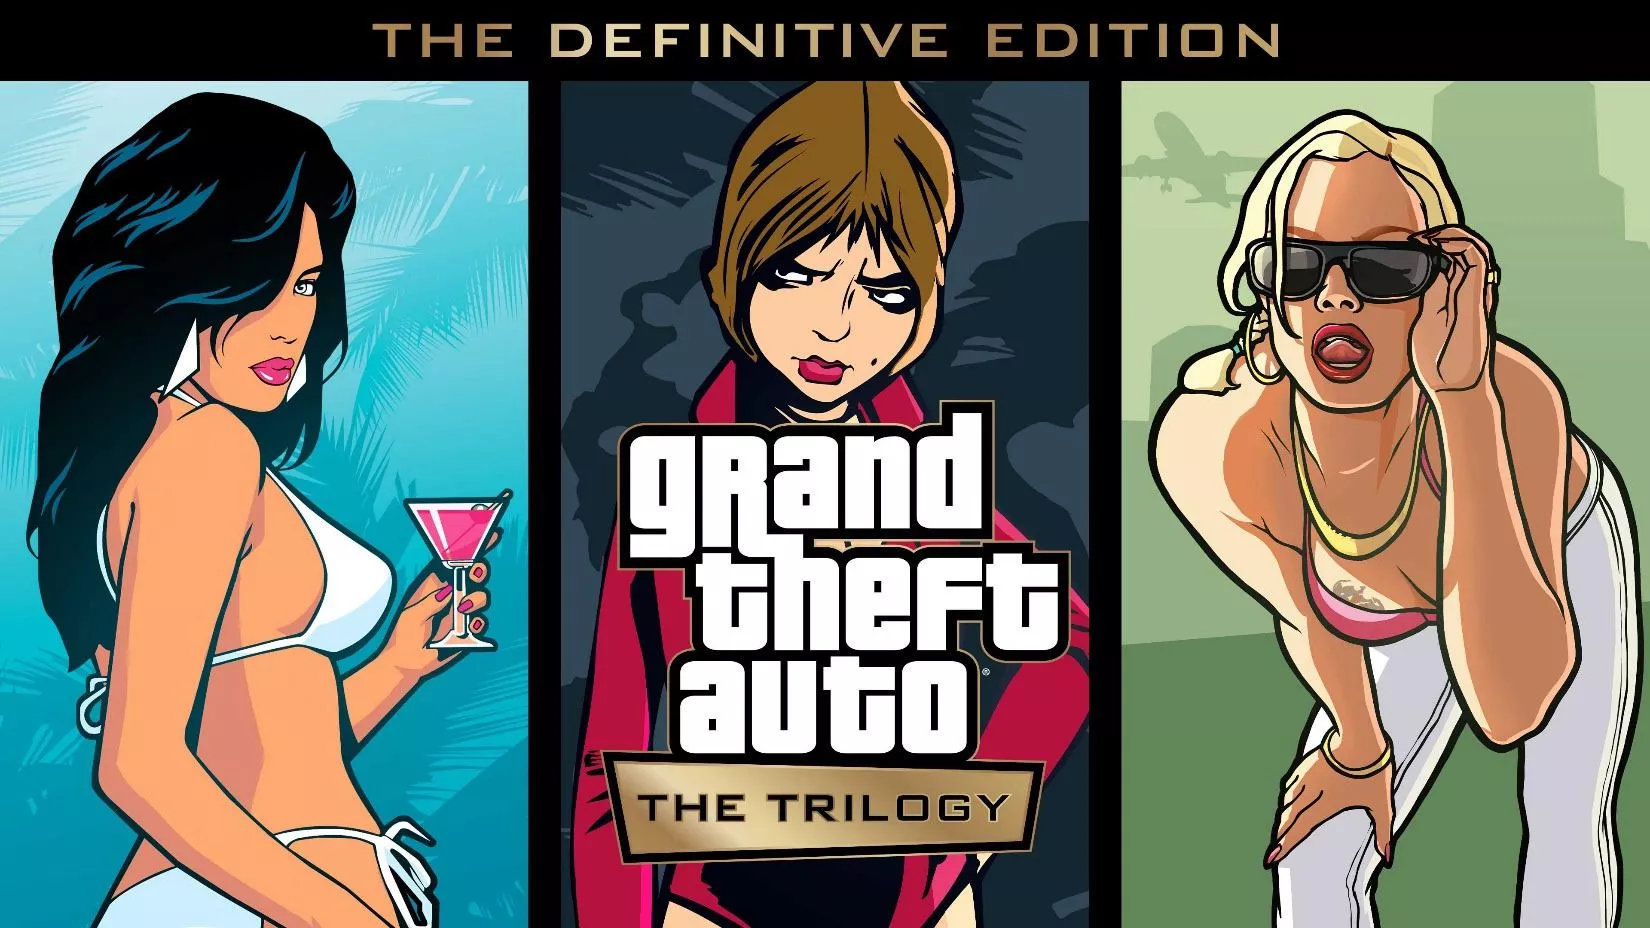 Grand Theft Auto The Trilogy: The Definitive Edition offiziell angekündigt Heropic